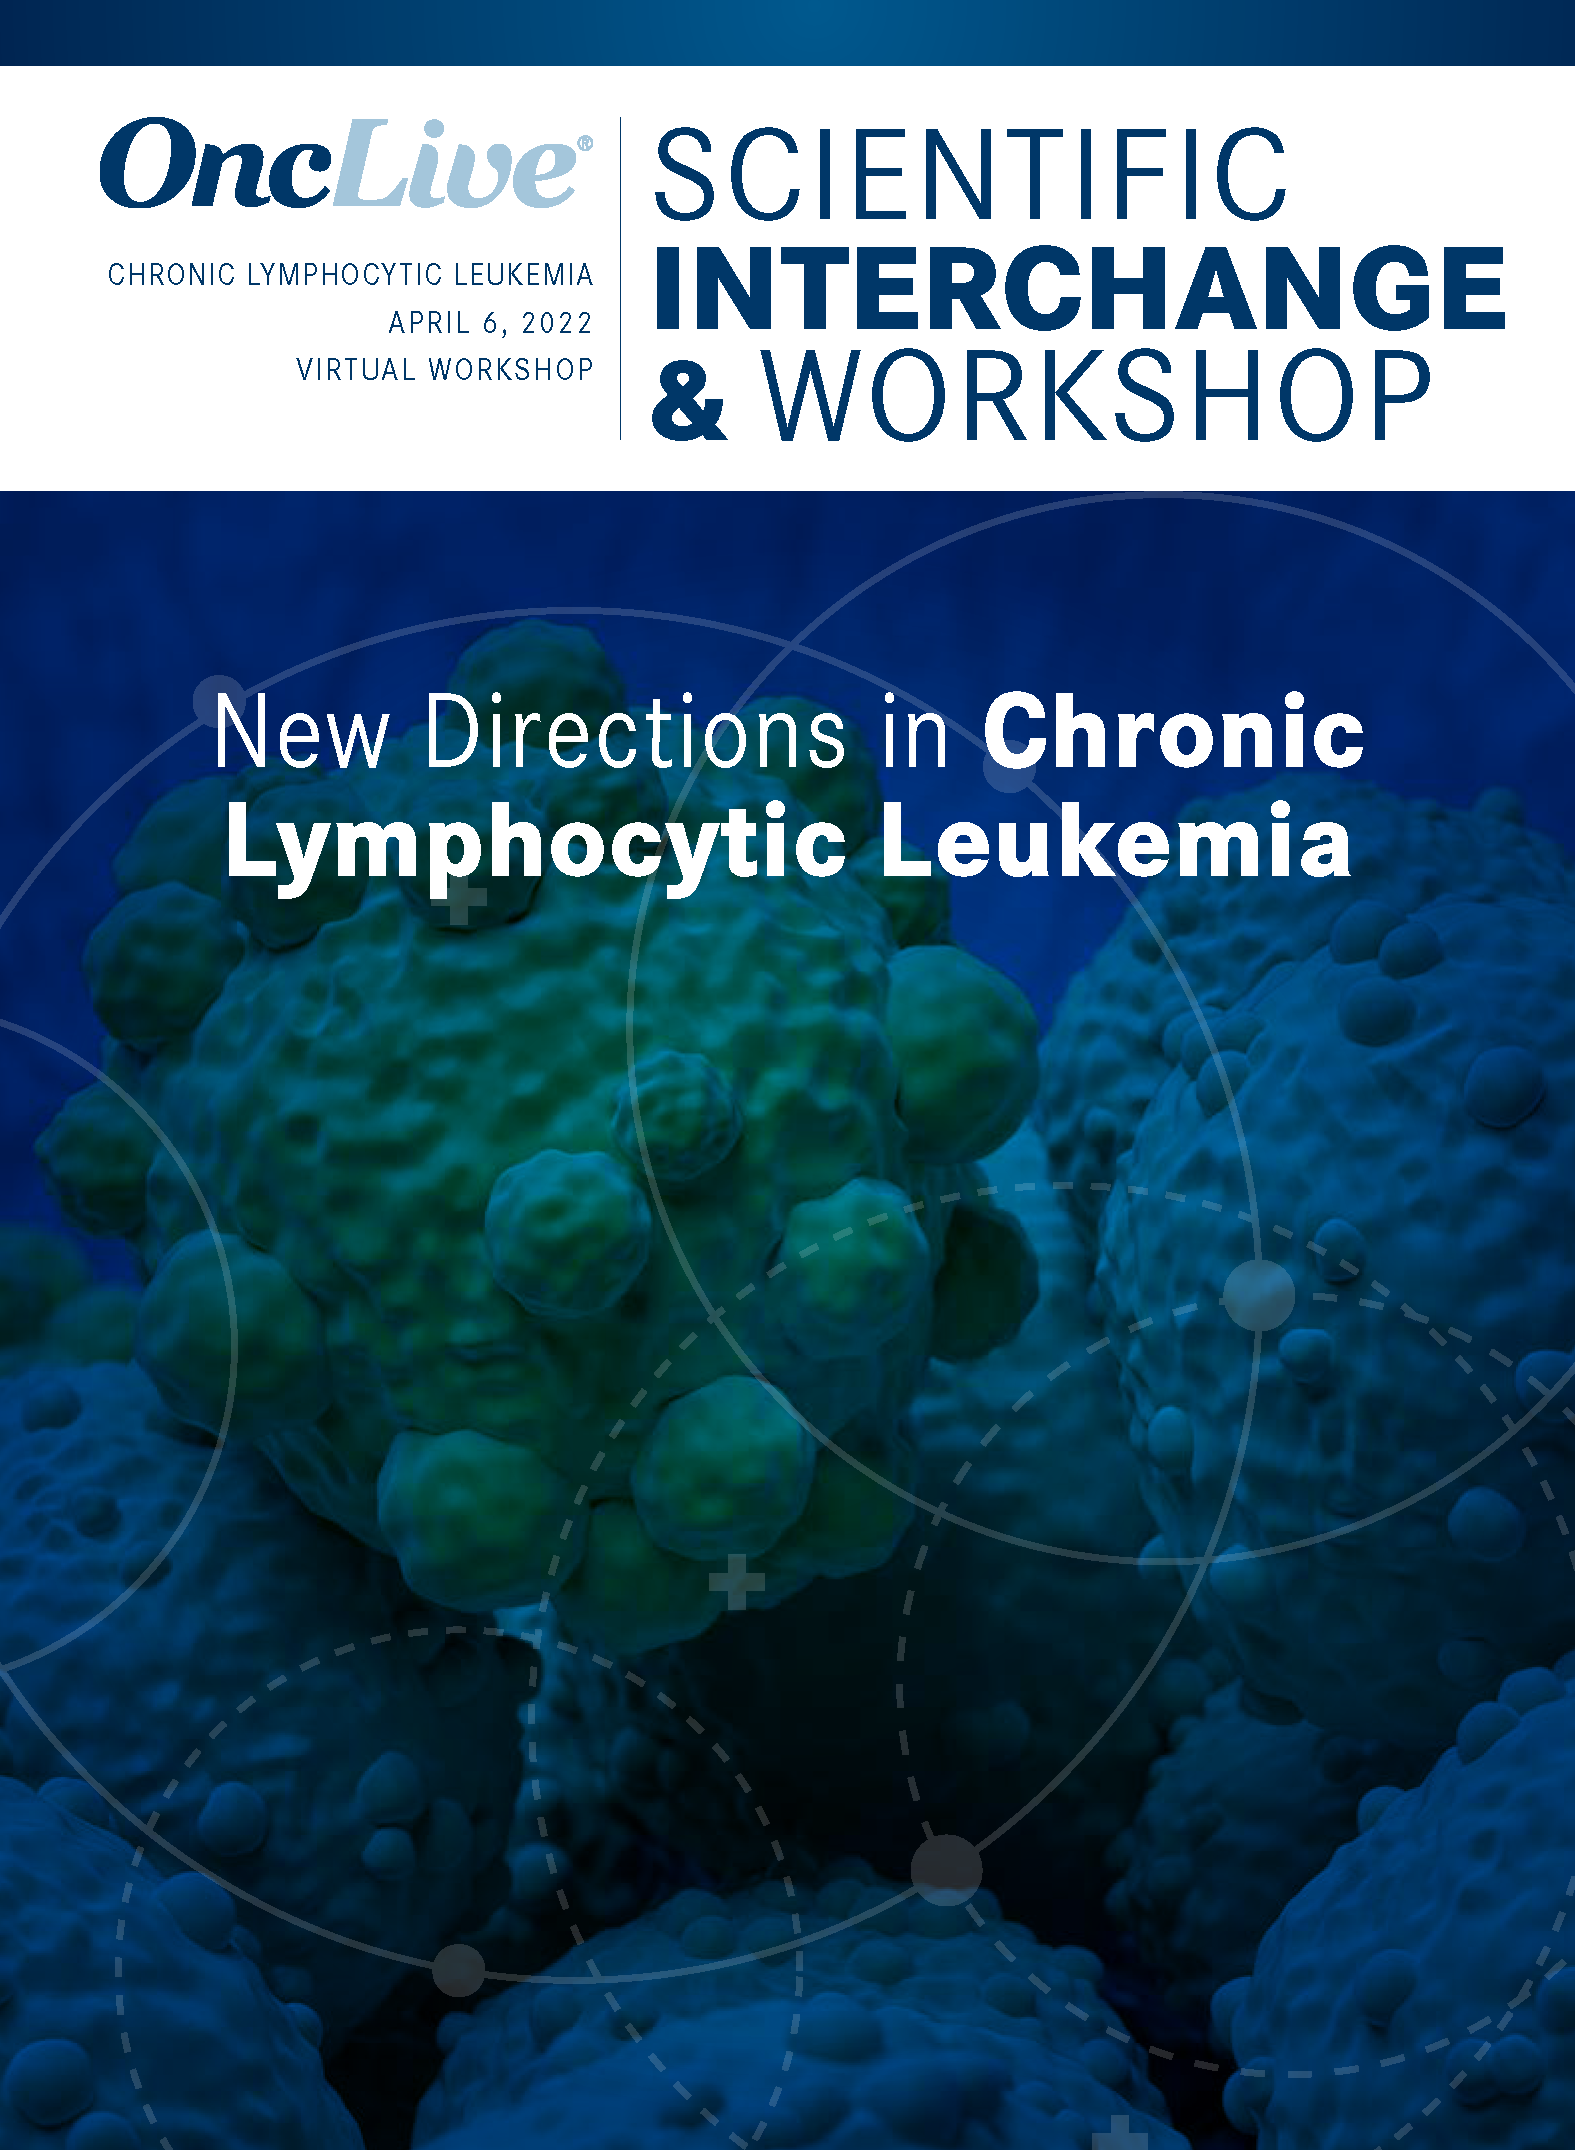 New Directions in CLL